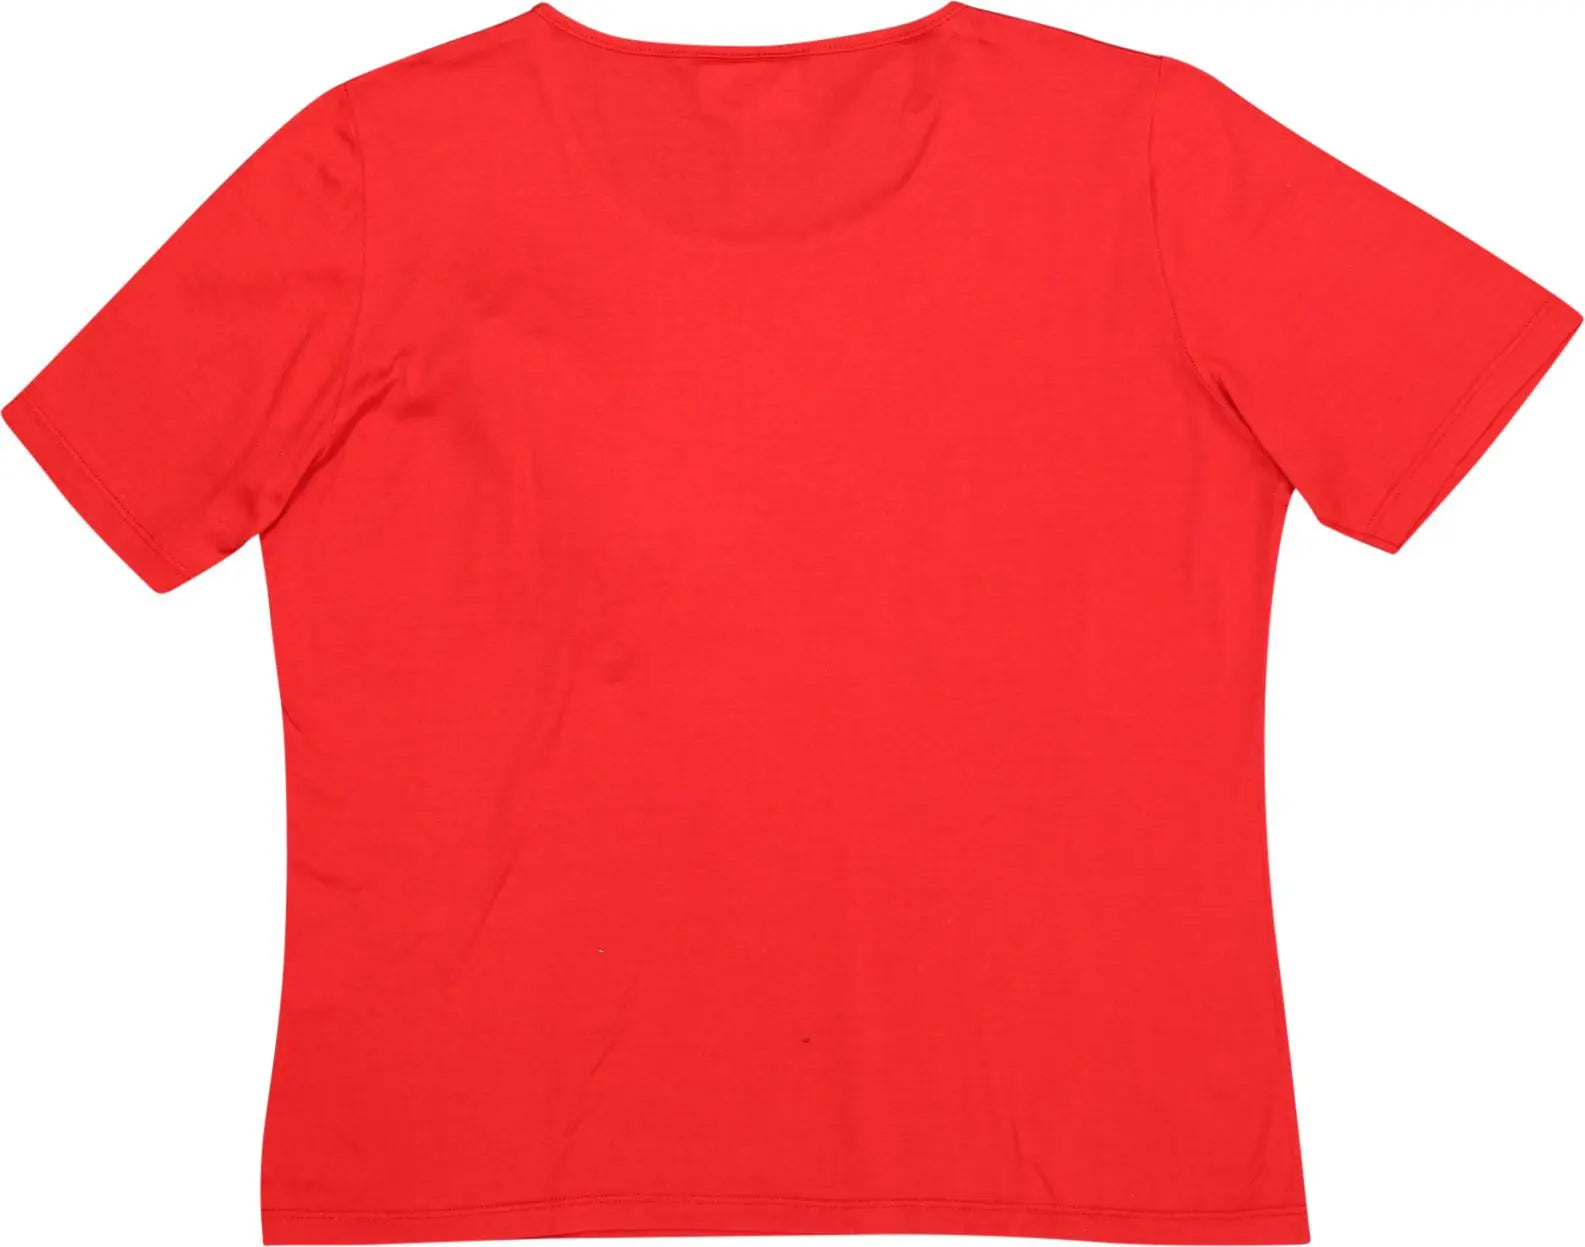 Gianfrediani - Red T-shirt by Gianfrediani- ThriftTale.com - Vintage and second handclothing